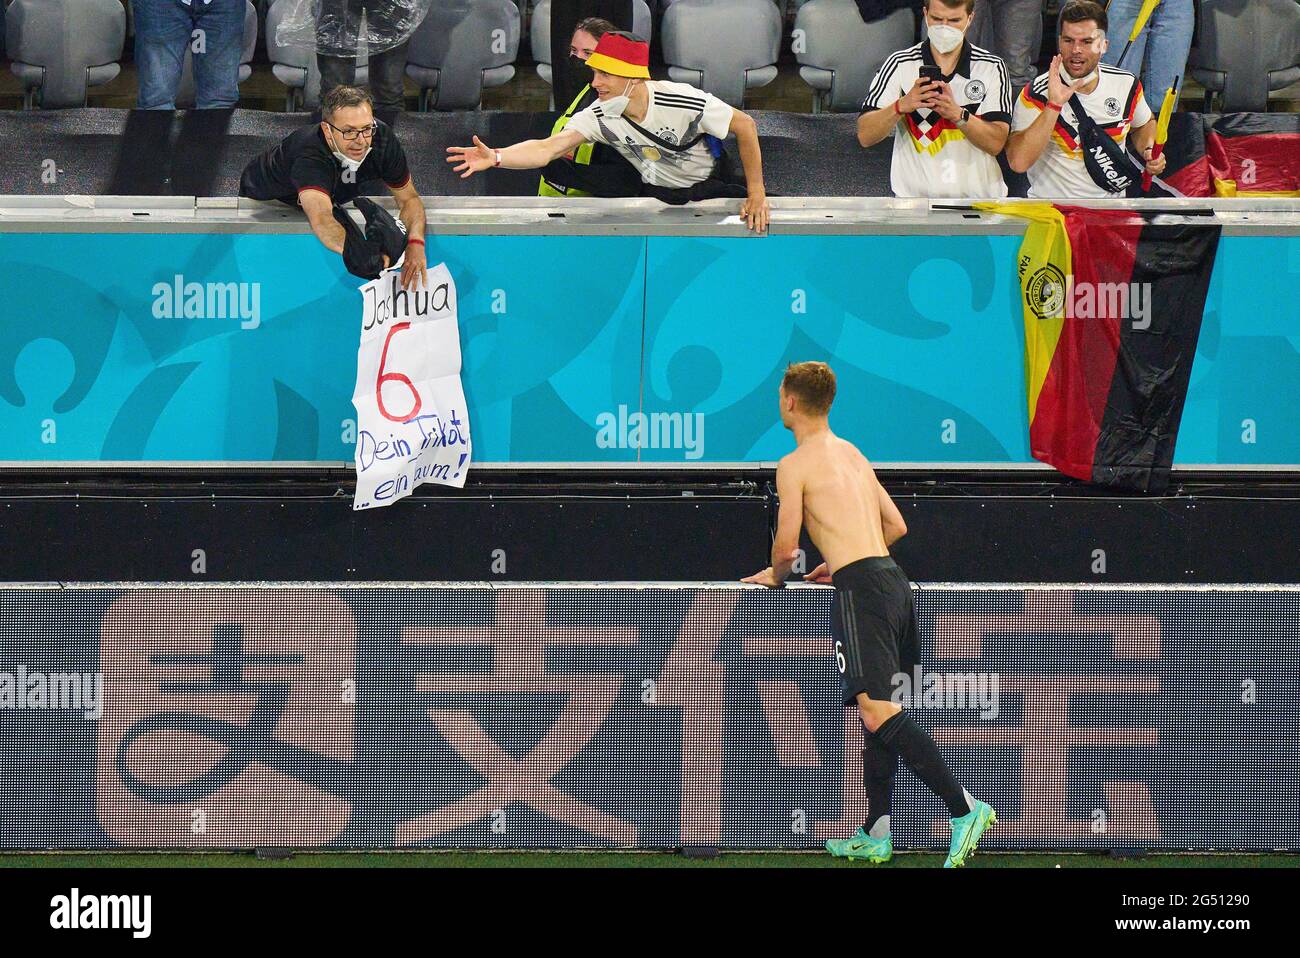 Joshua KIMMICH, DFB 6 offers his jersey to fans in the Group F match GERMANY, Hungary. , . in Season 2020/2021 on June 23, 2021 in Munich, Germany. Credit: Peter Schatz/Alamy Live News Stock Photo